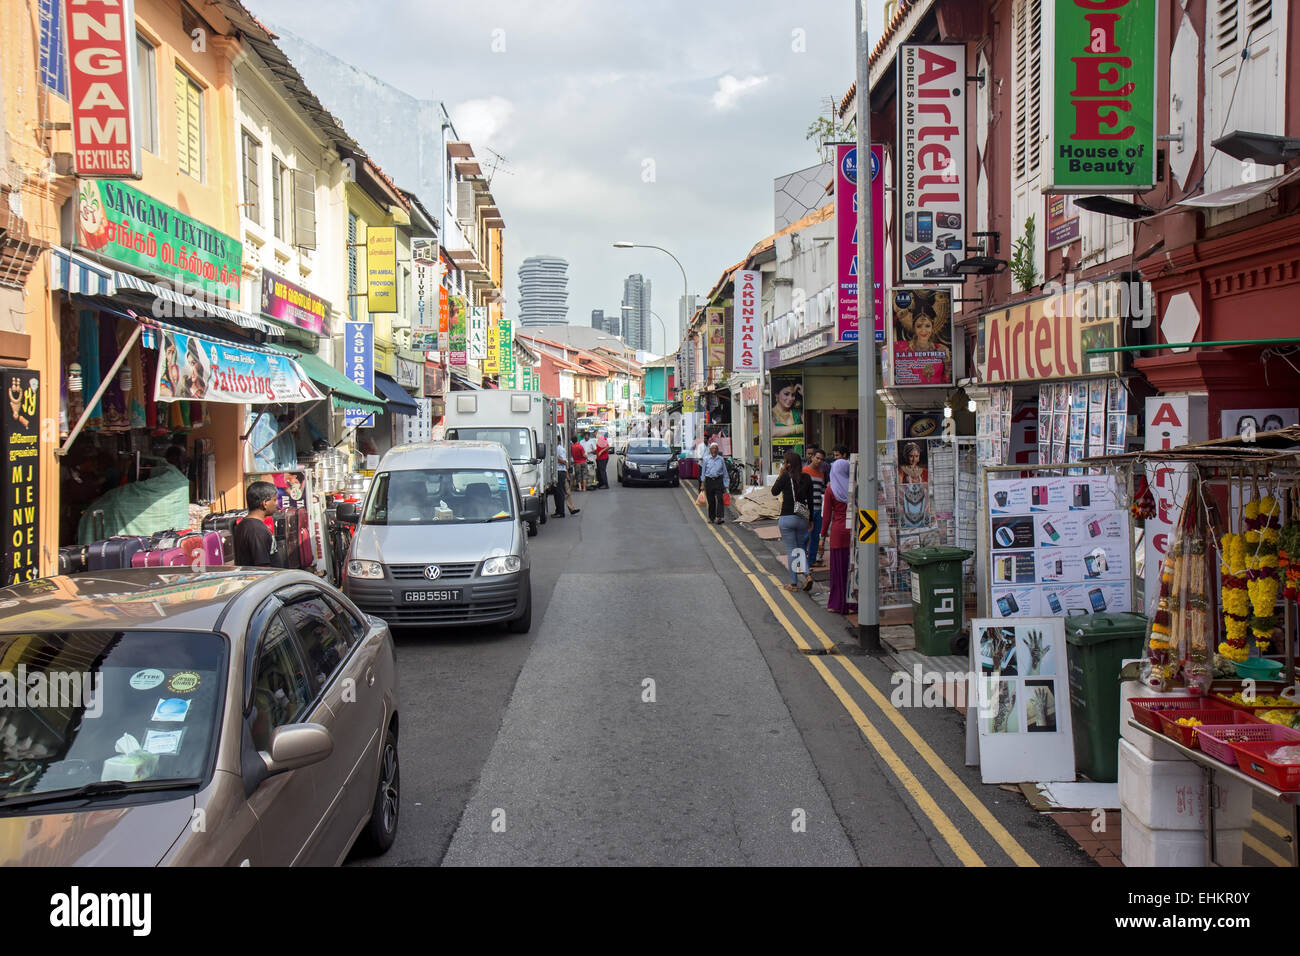 shopping street in the Little Indian district in Singapore Stock Photo